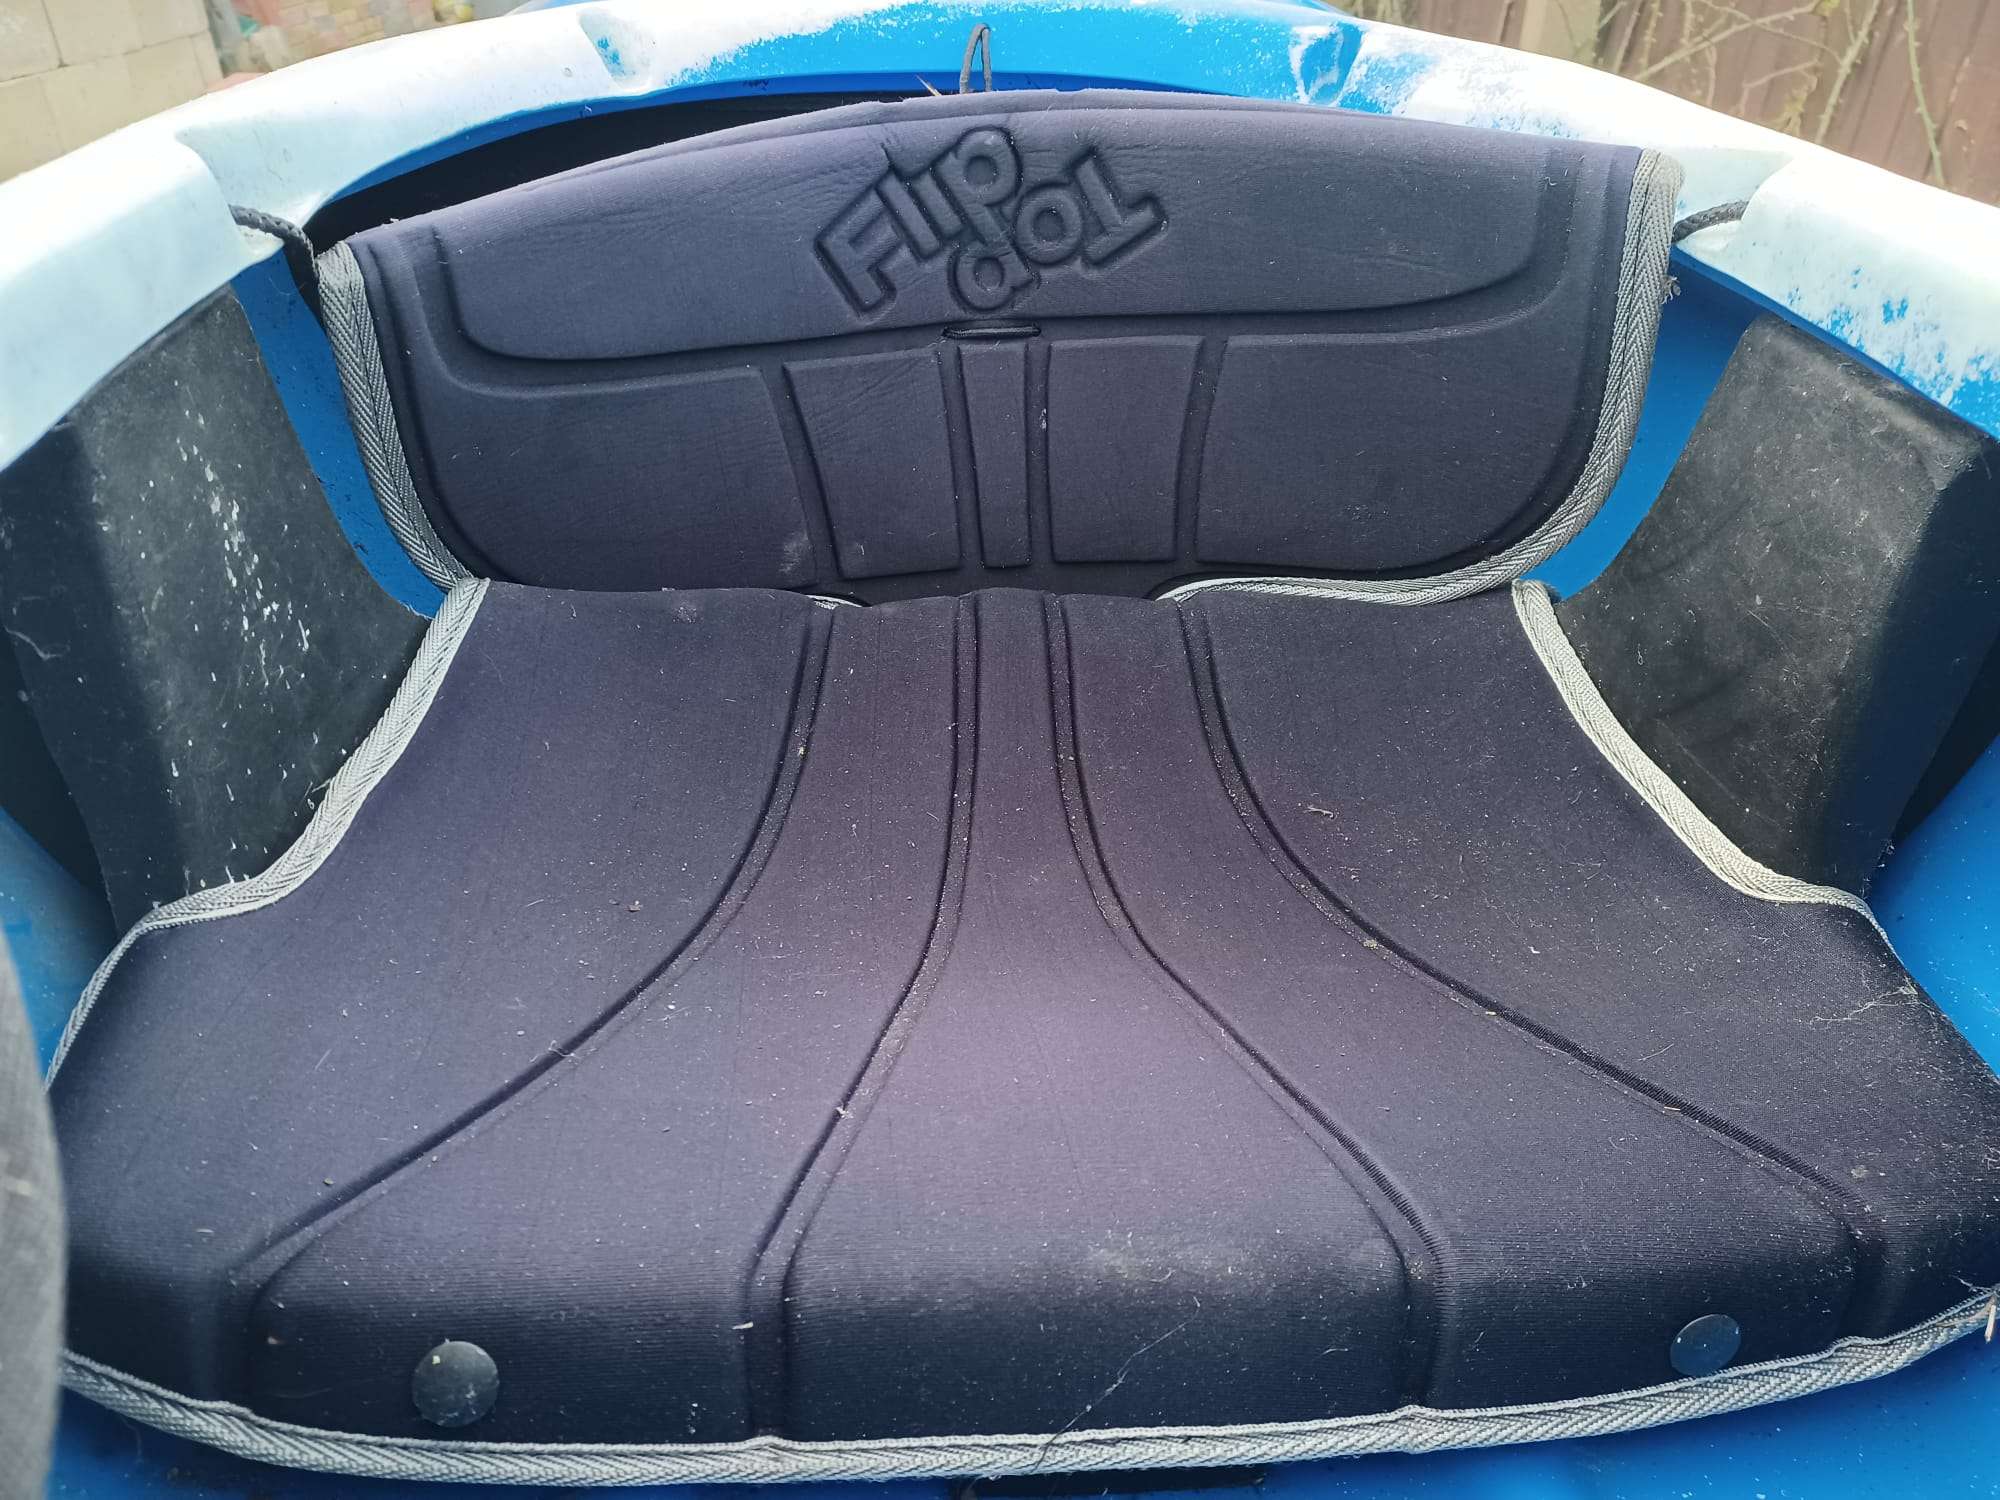 A seat of a car

Description automatically generated